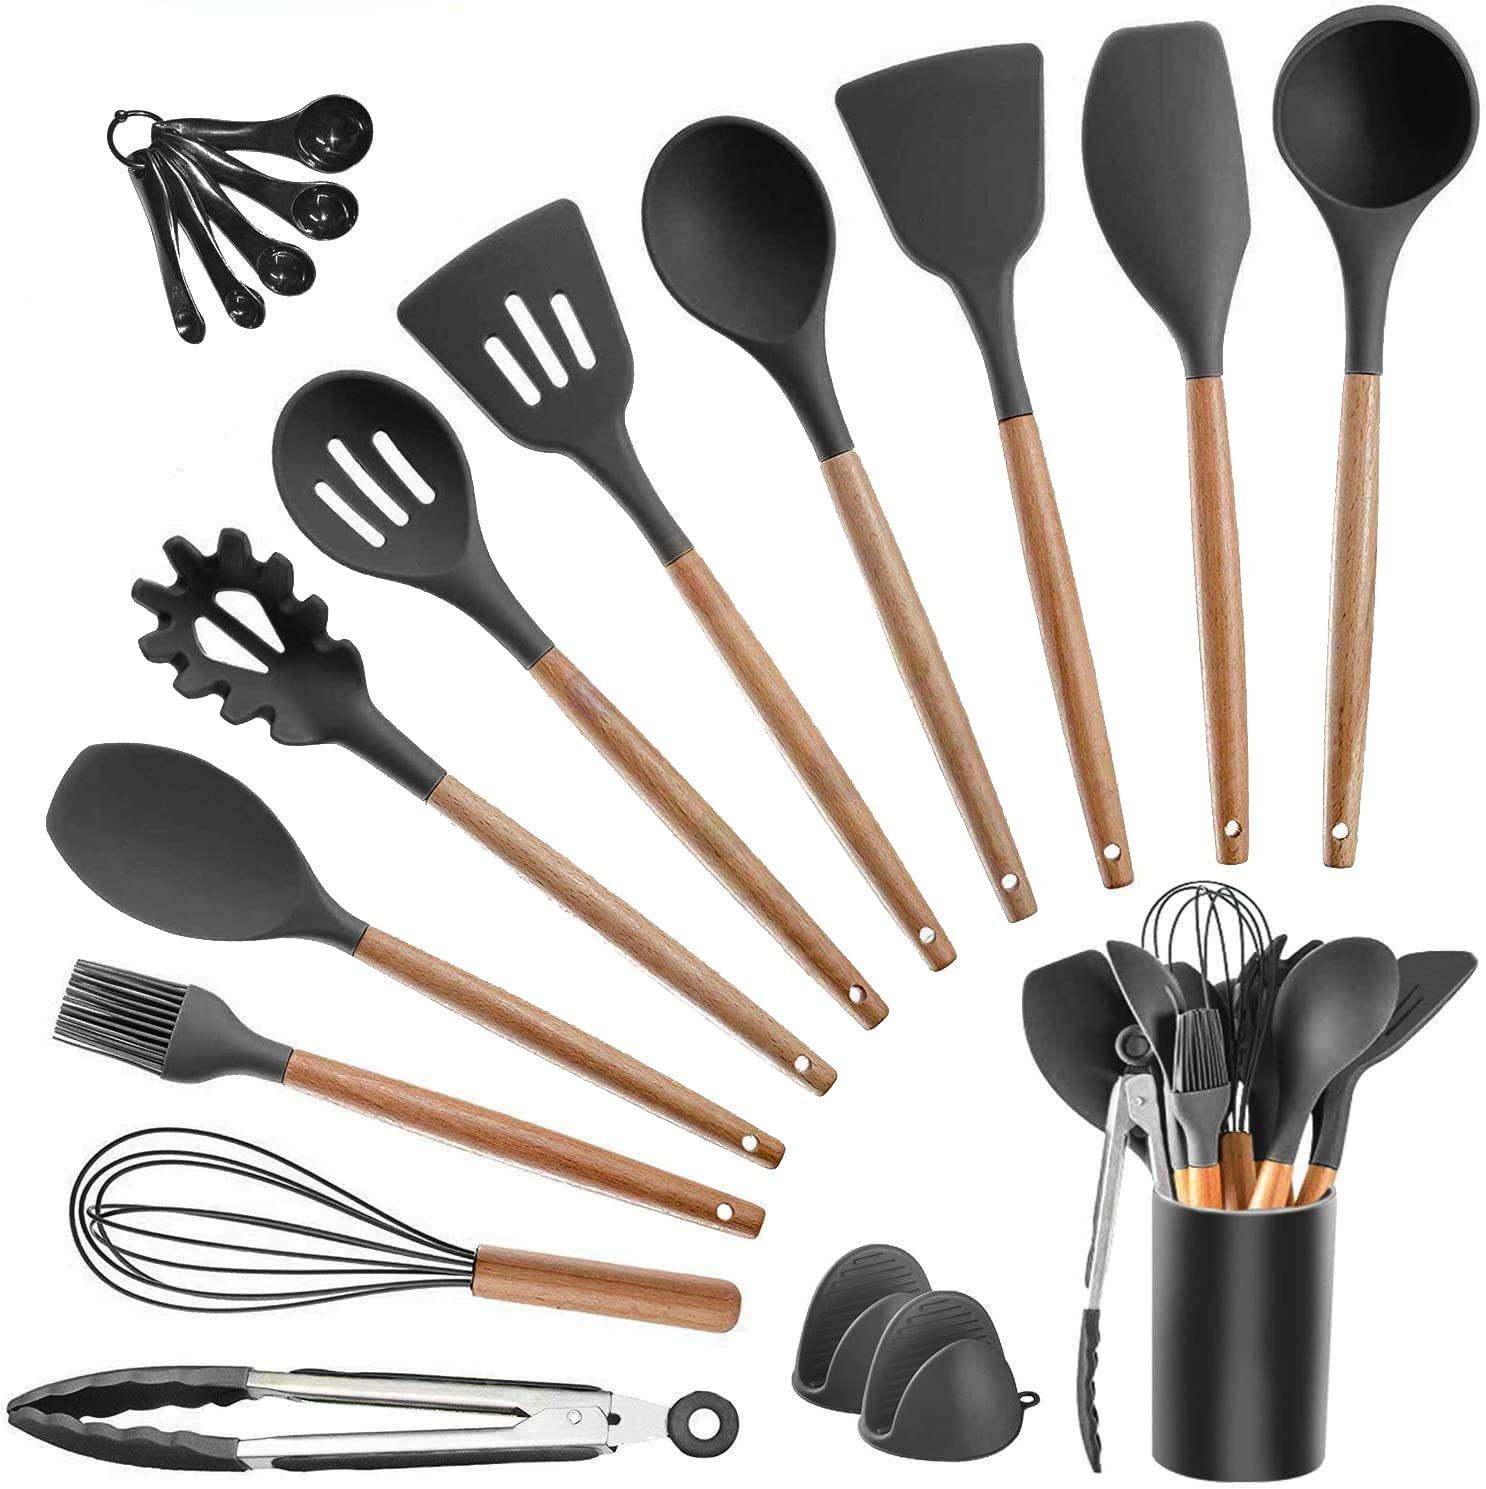 18PCS Silicone Cooking Utensils Set Kitchen Cookware for Nonstick